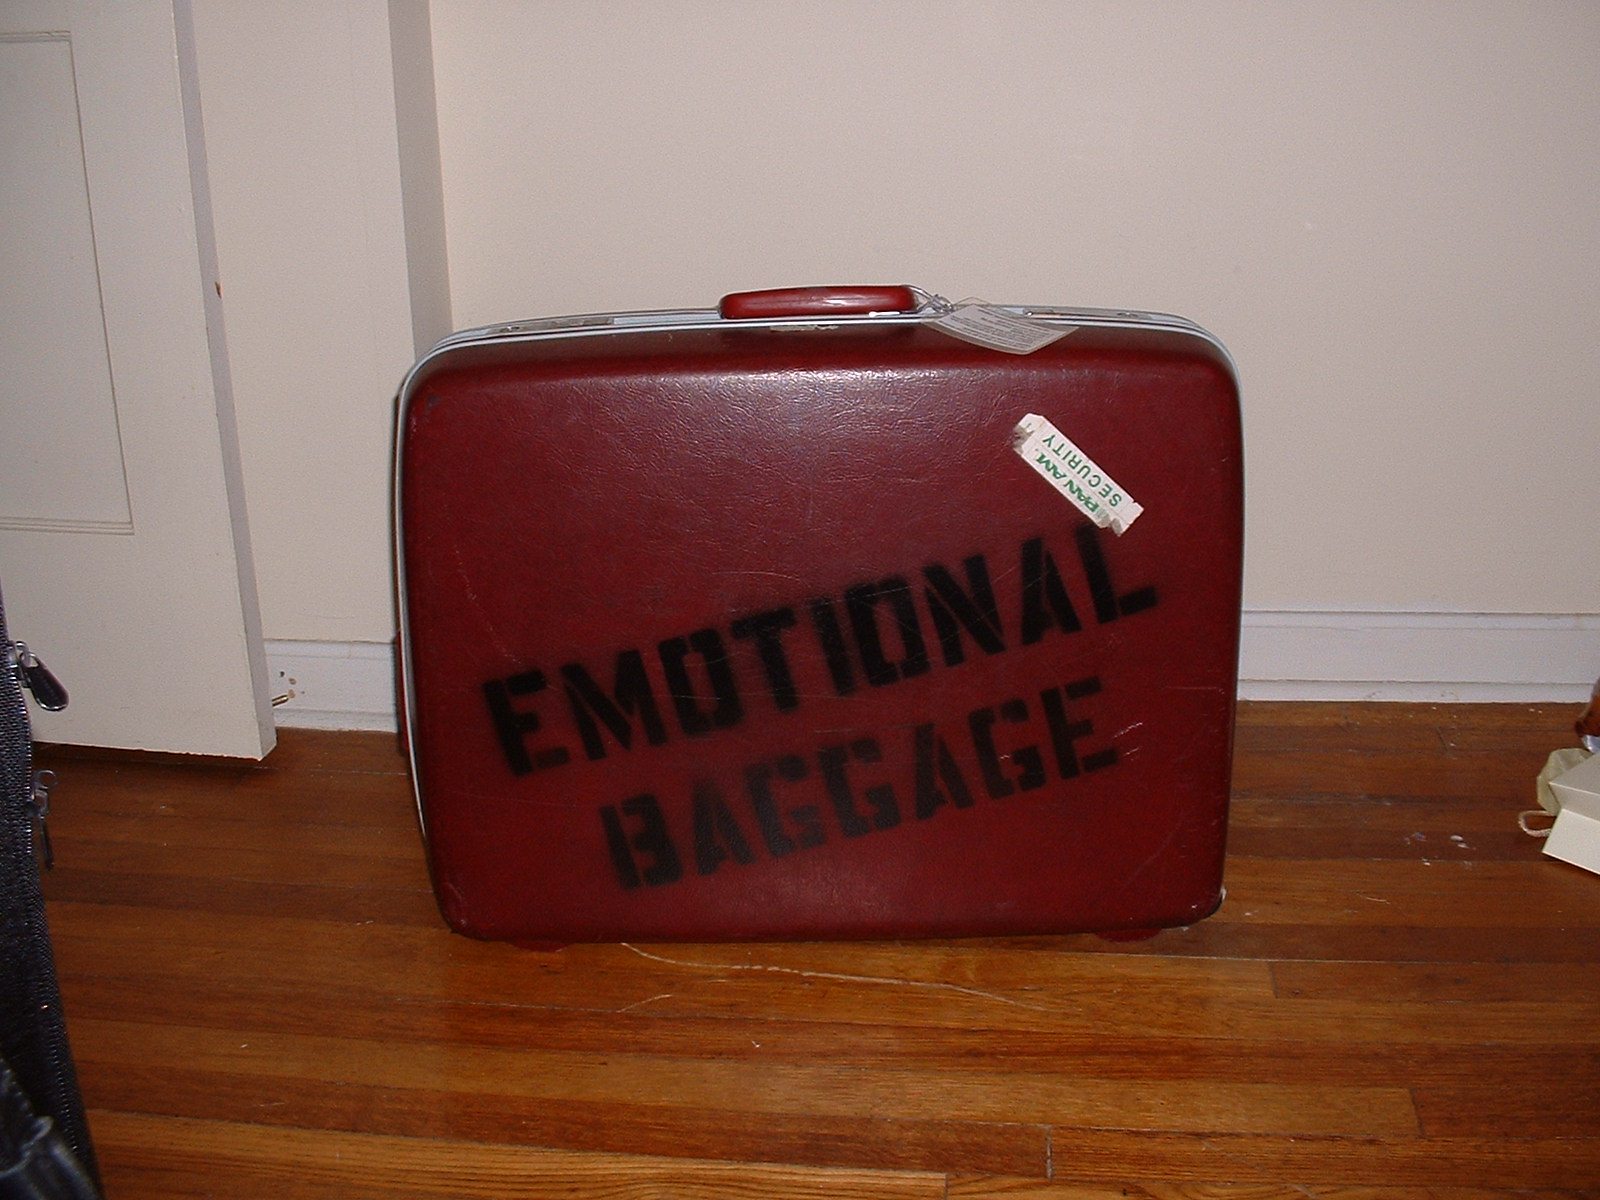 Image: Retro red suitcase with 'Emotional Baggage' stenciled on side.